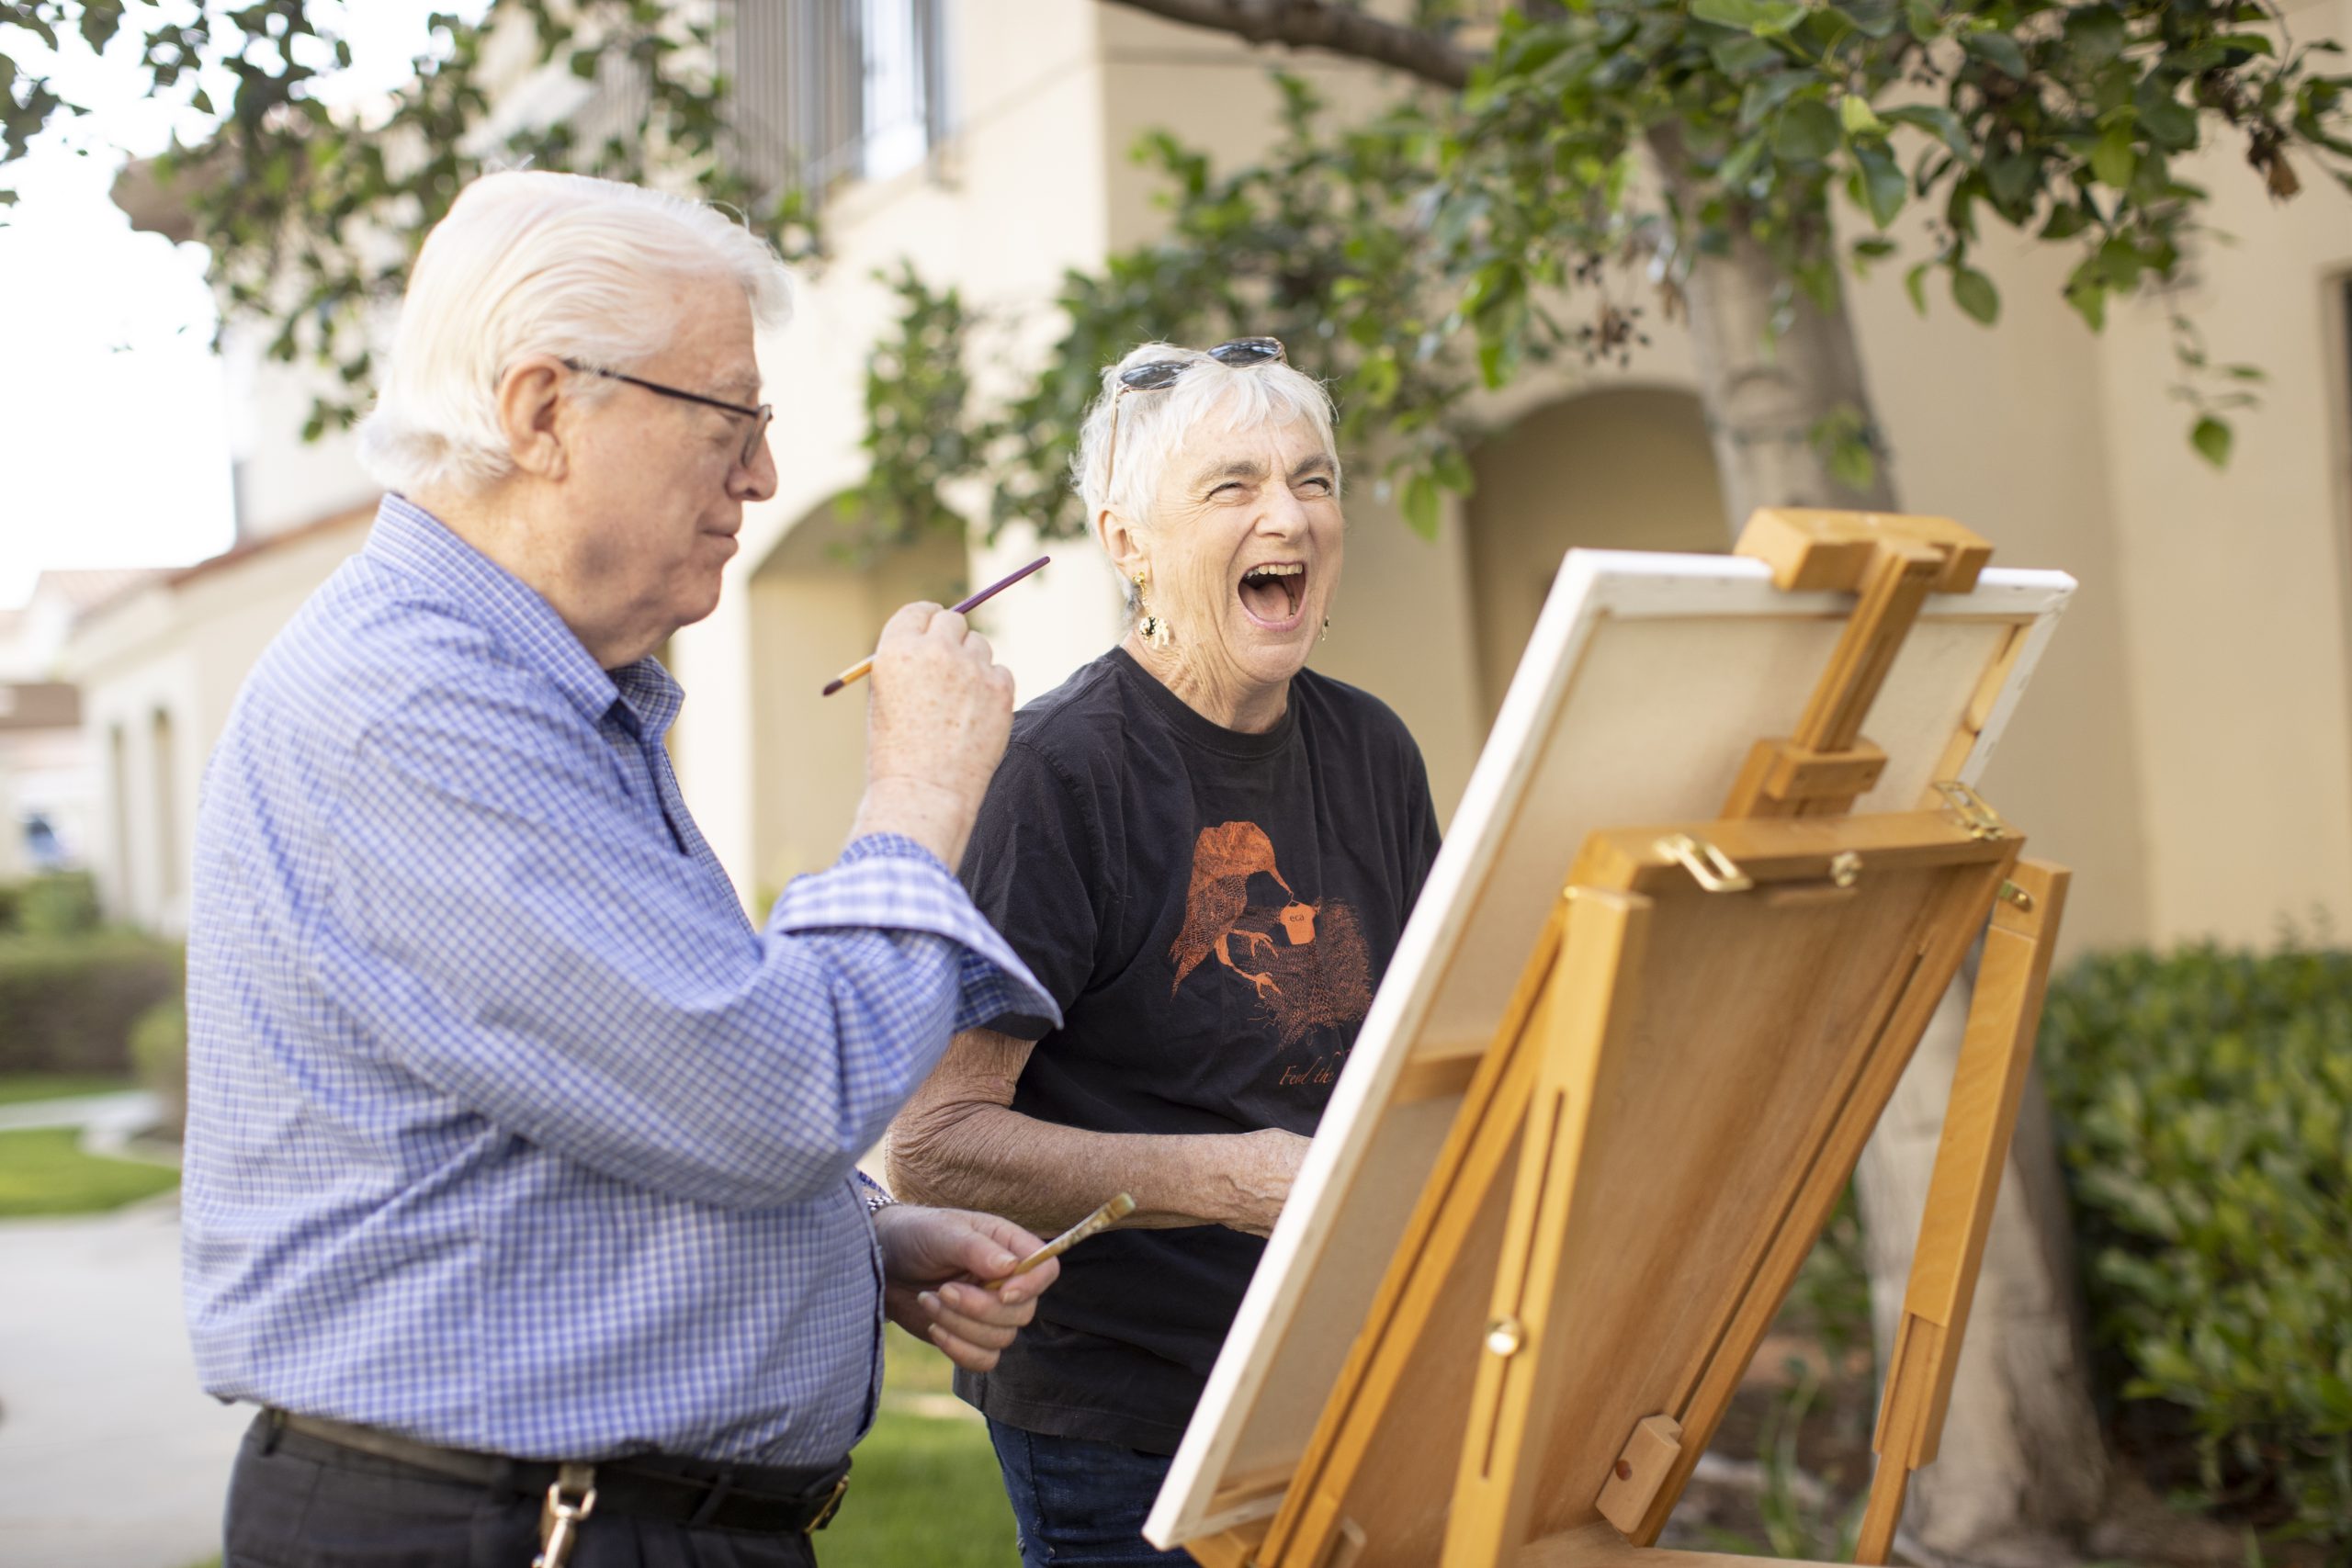 An elderly couple enjoying a creative moment as they paint together outdoors.